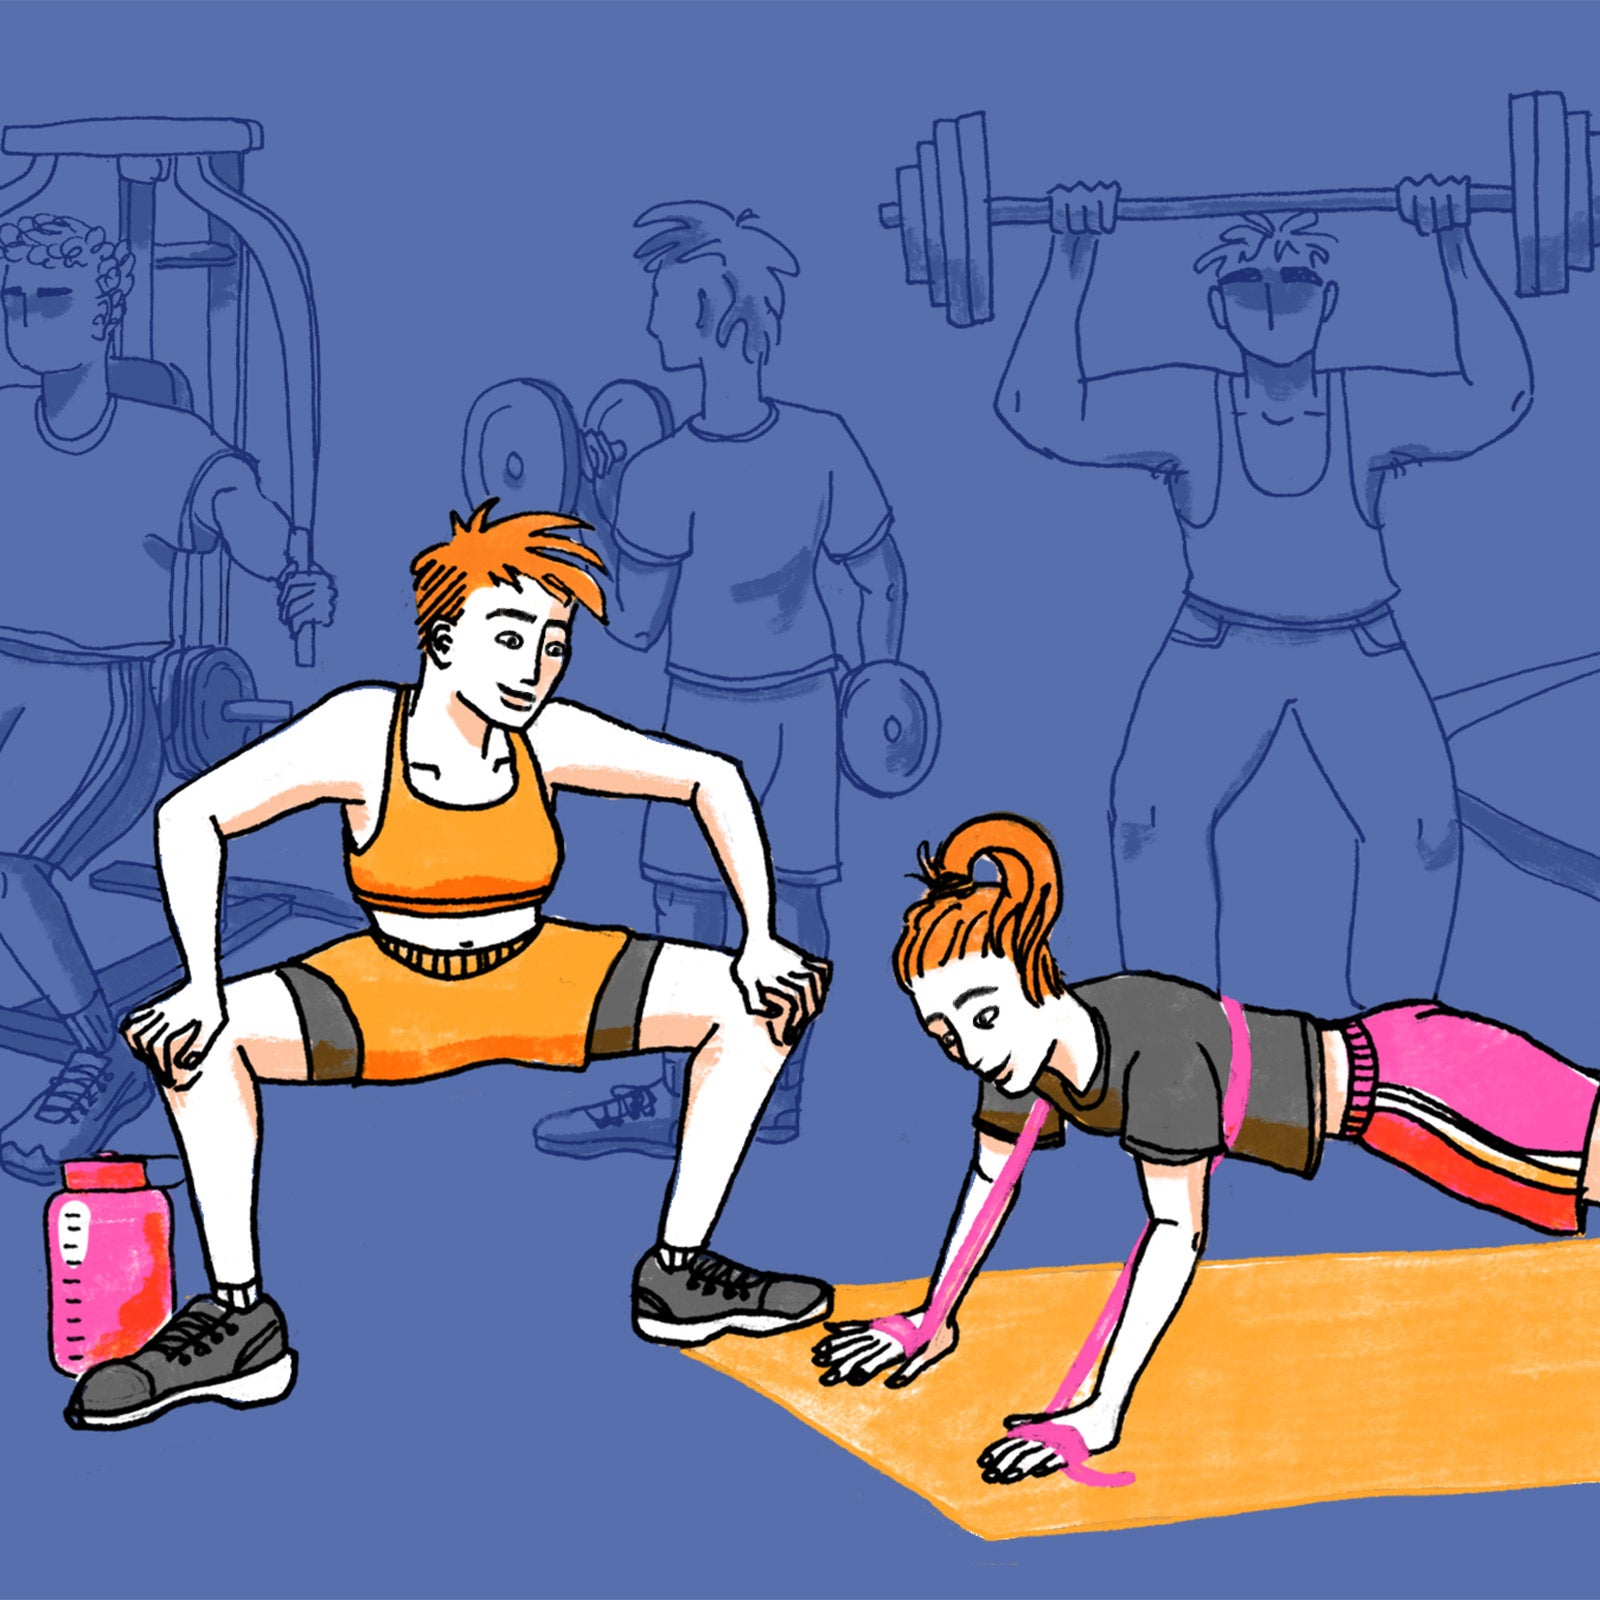 How to Help the New People at the Gym Without Being Condescending